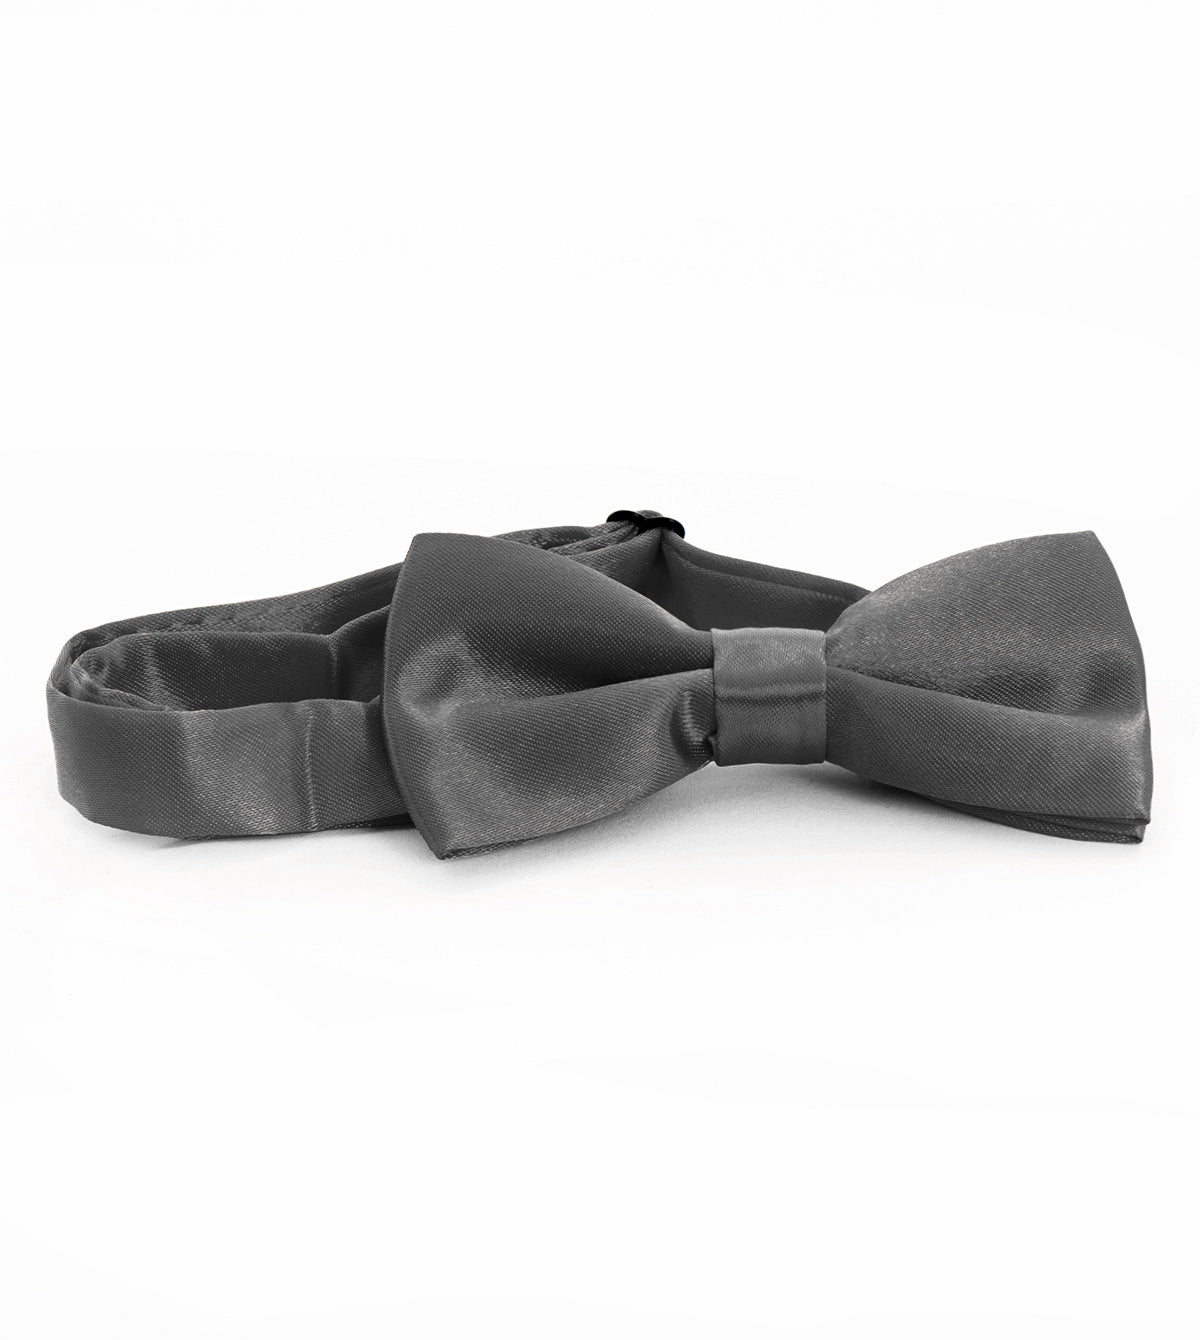 Butterfly Bow Tie Satin Men Unisex Dark Gray Bow Tie Elegant Accessory Casual Ceremony Basic GIOSAL-CP1068A